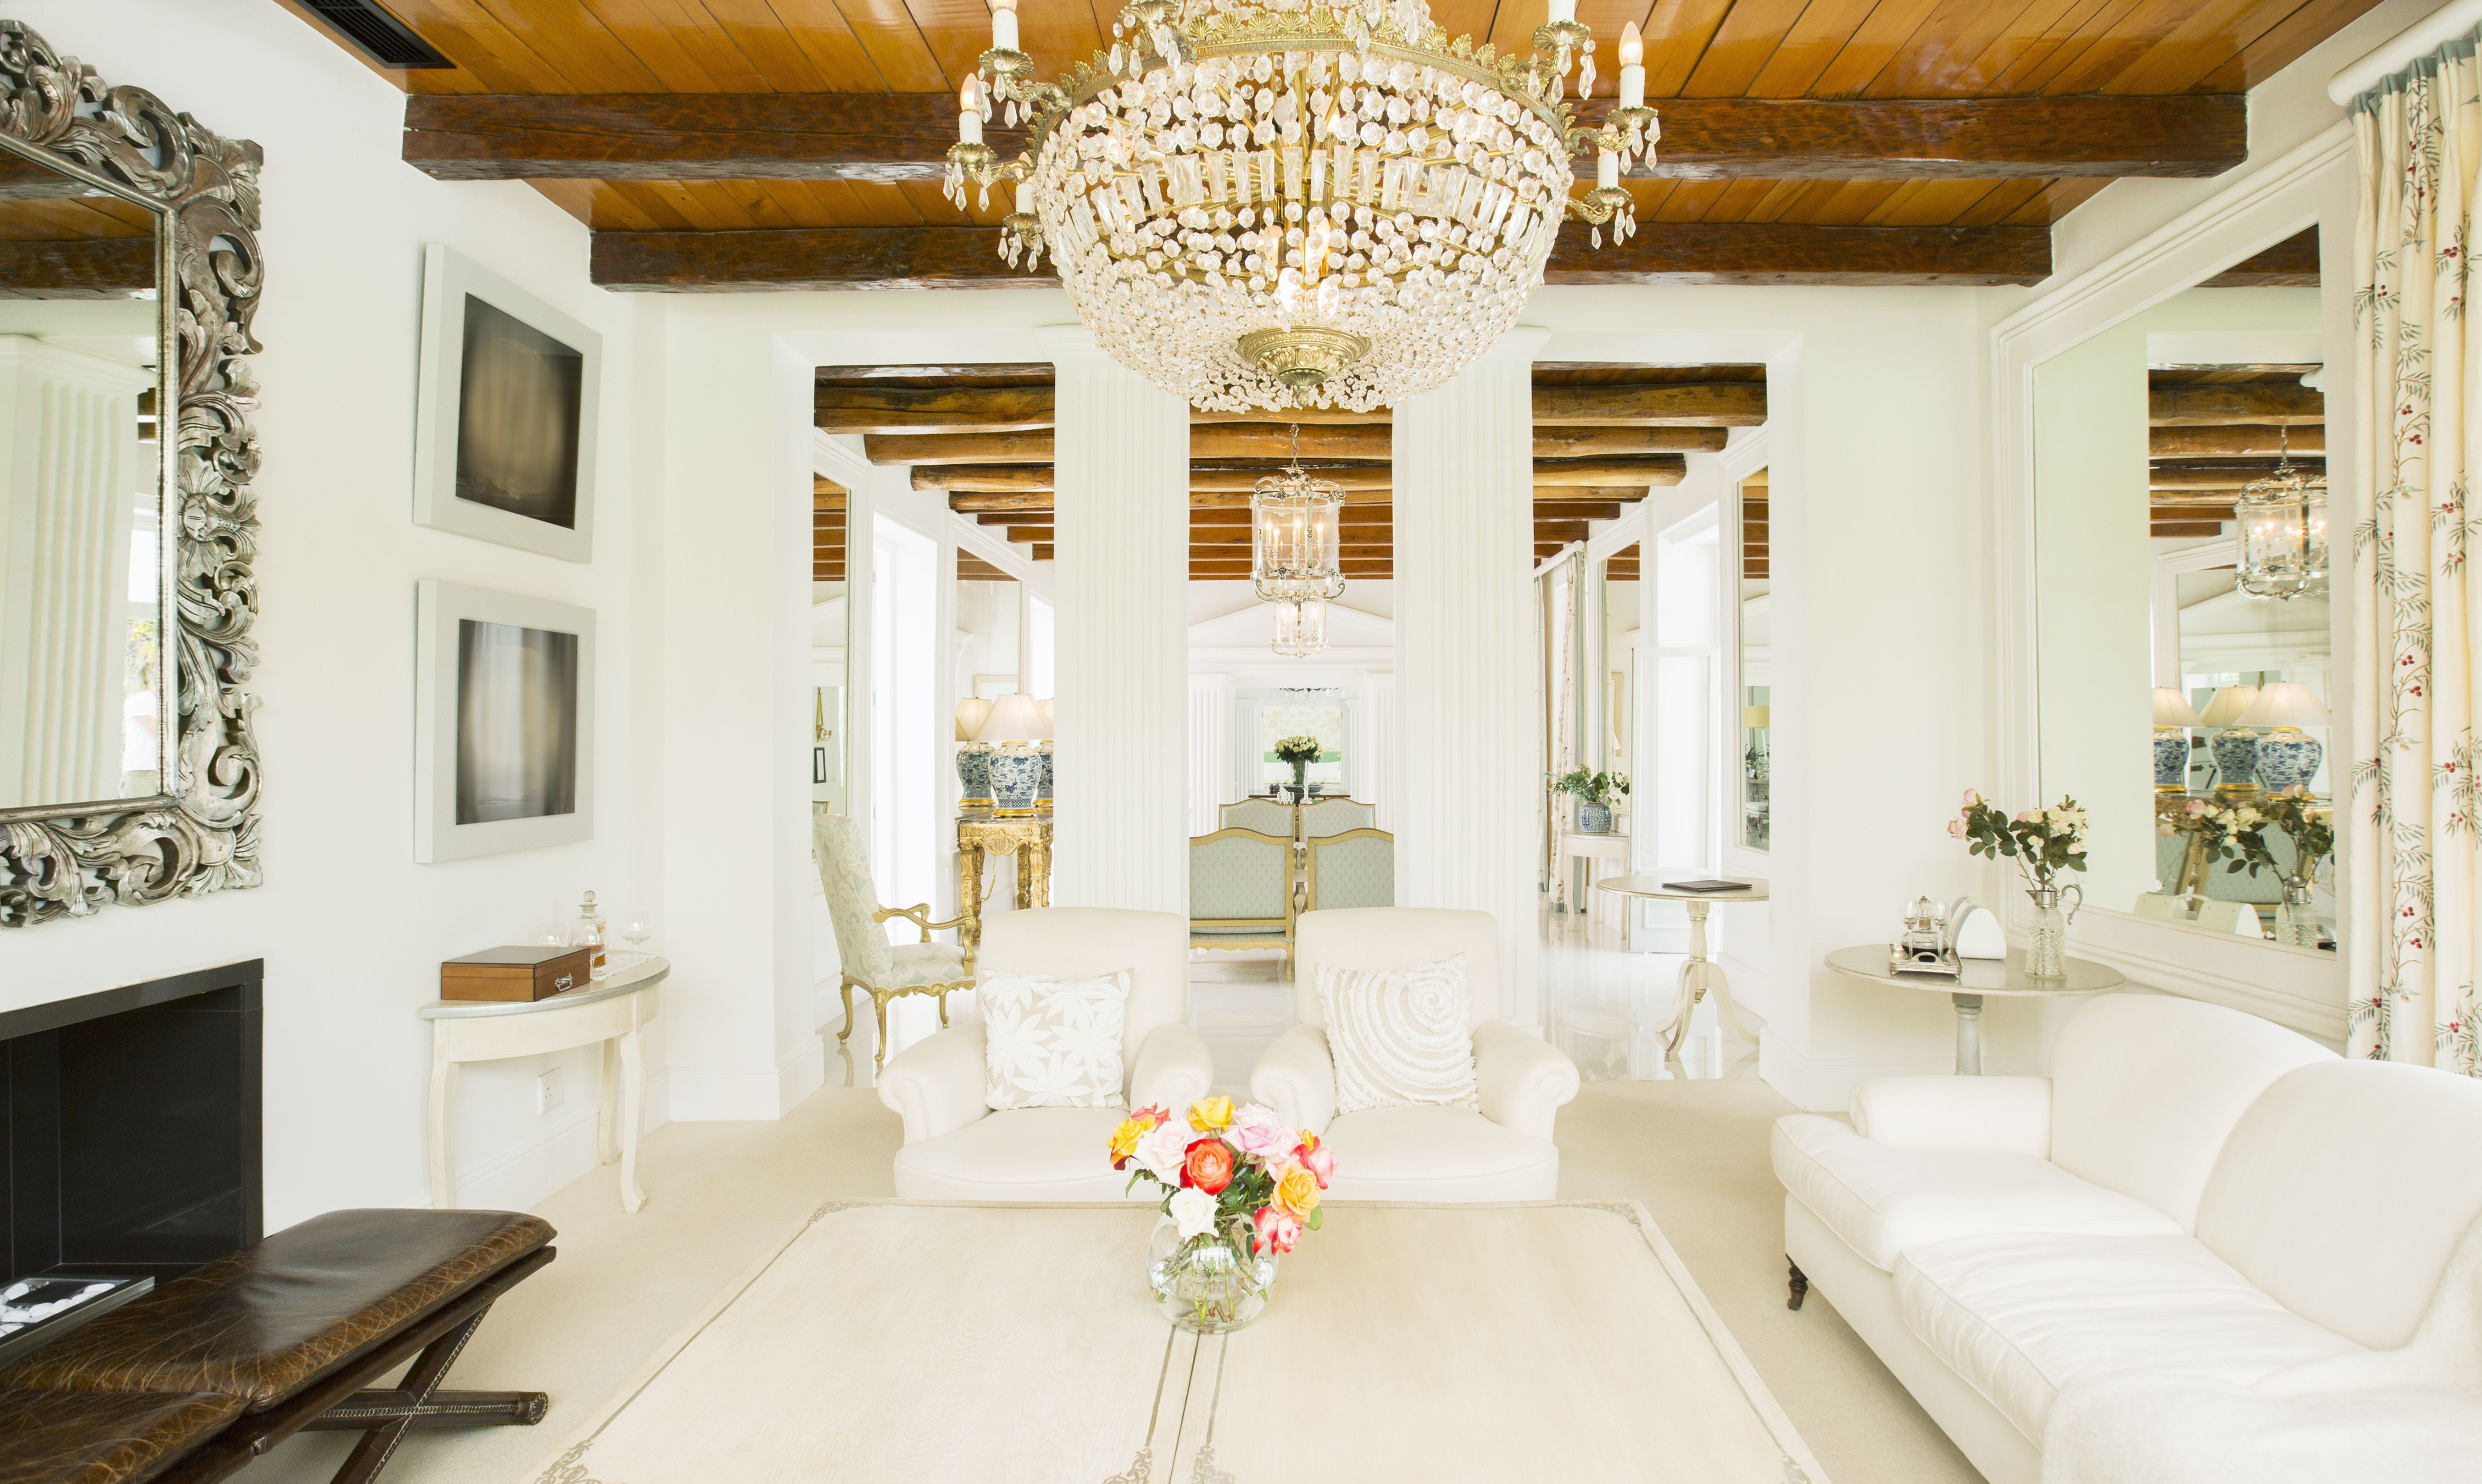 Formal Style Decorating for an Elegant Home